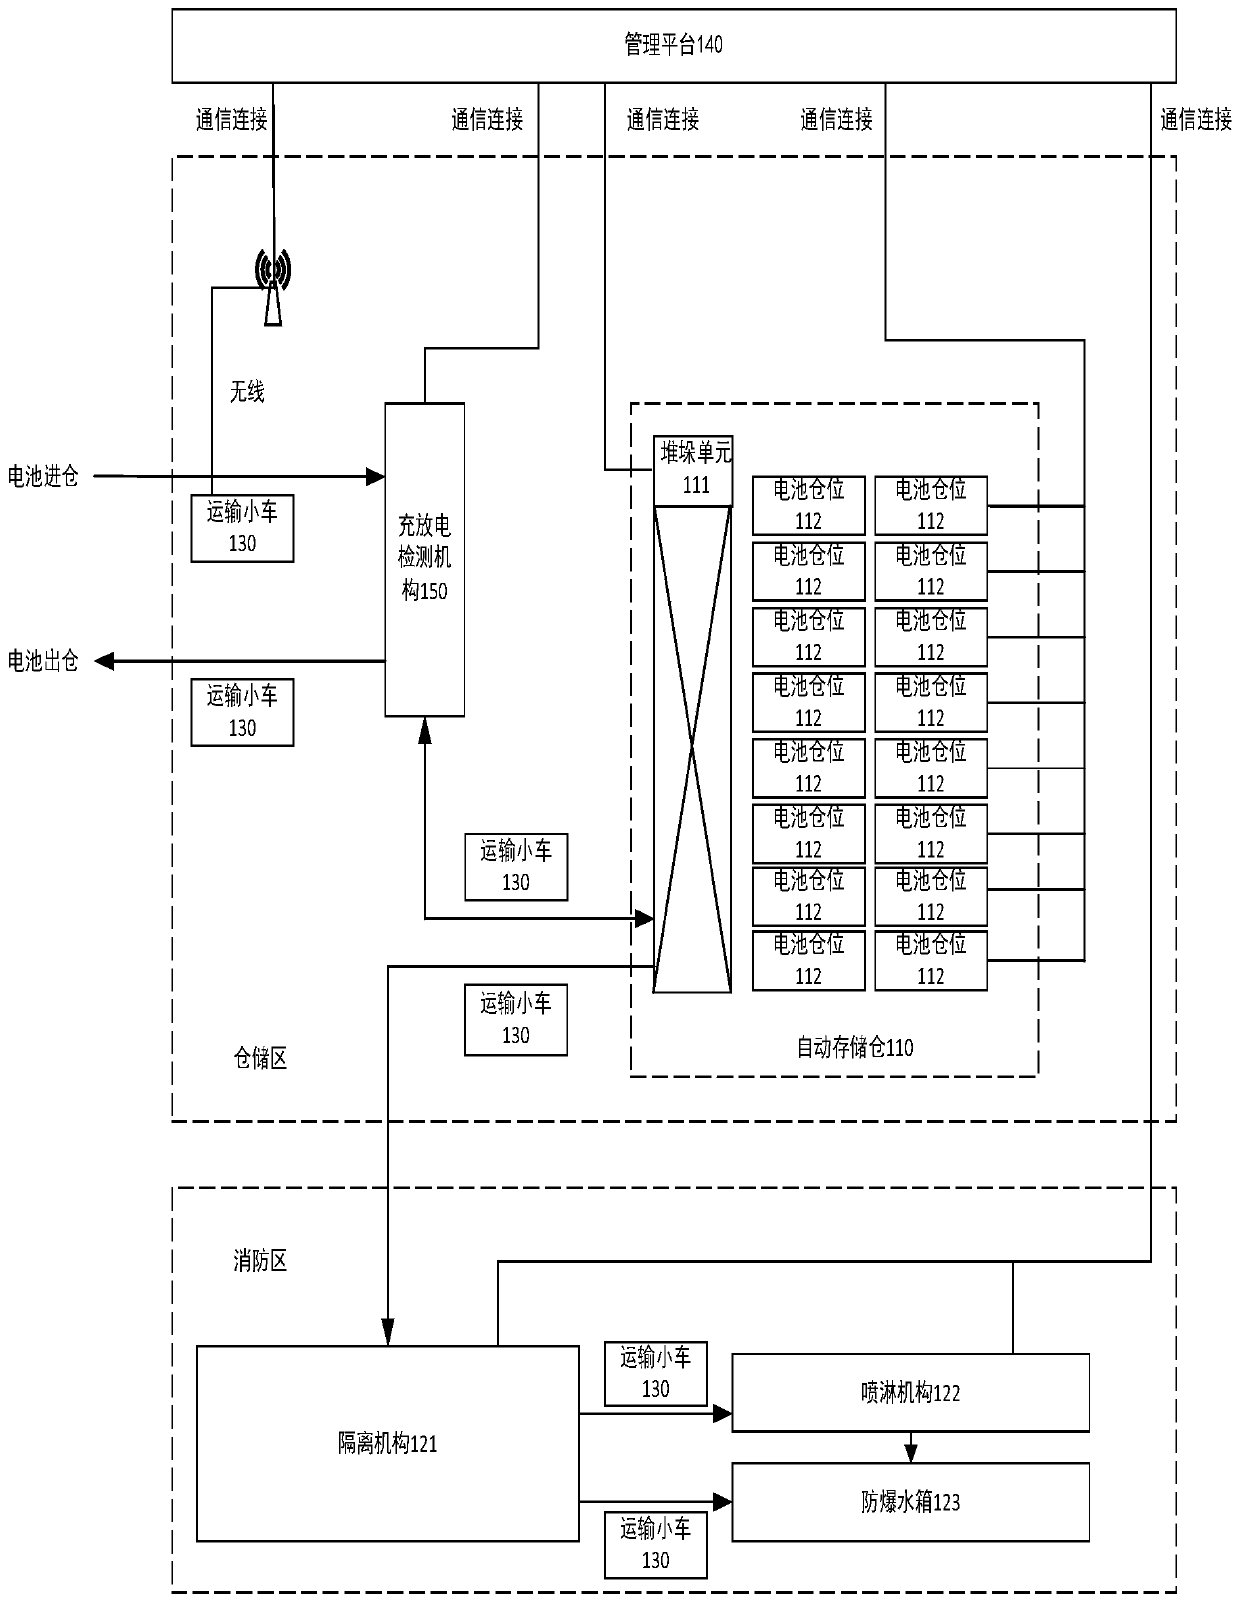 Power battery intelligent warehousing system and method